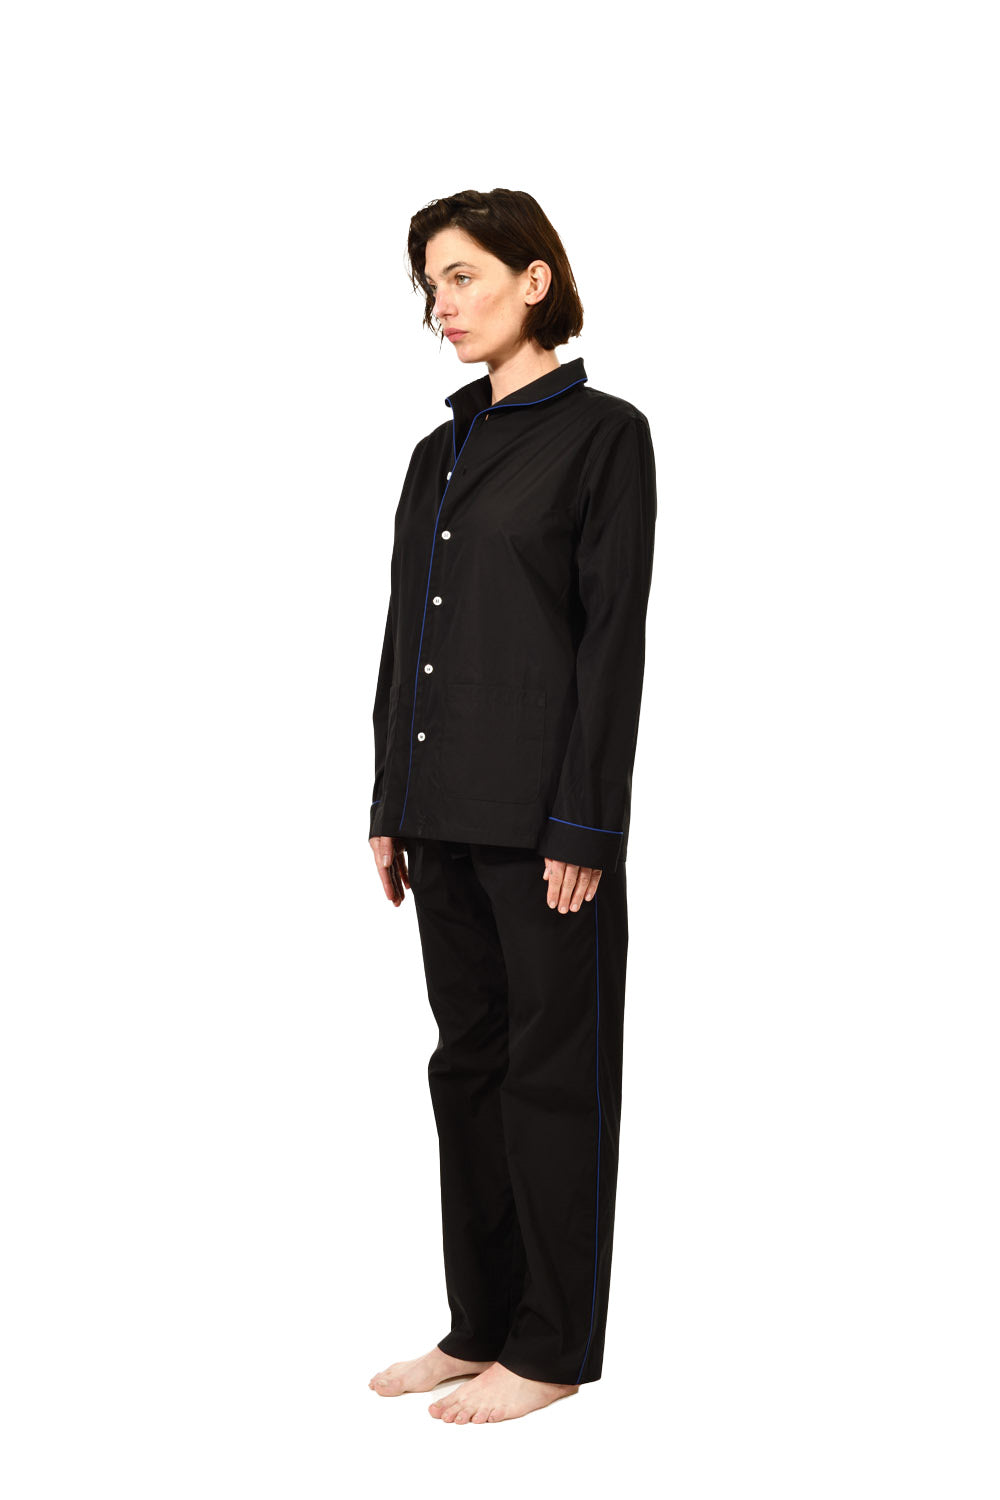 The Waldorf in black cotton broadcloth